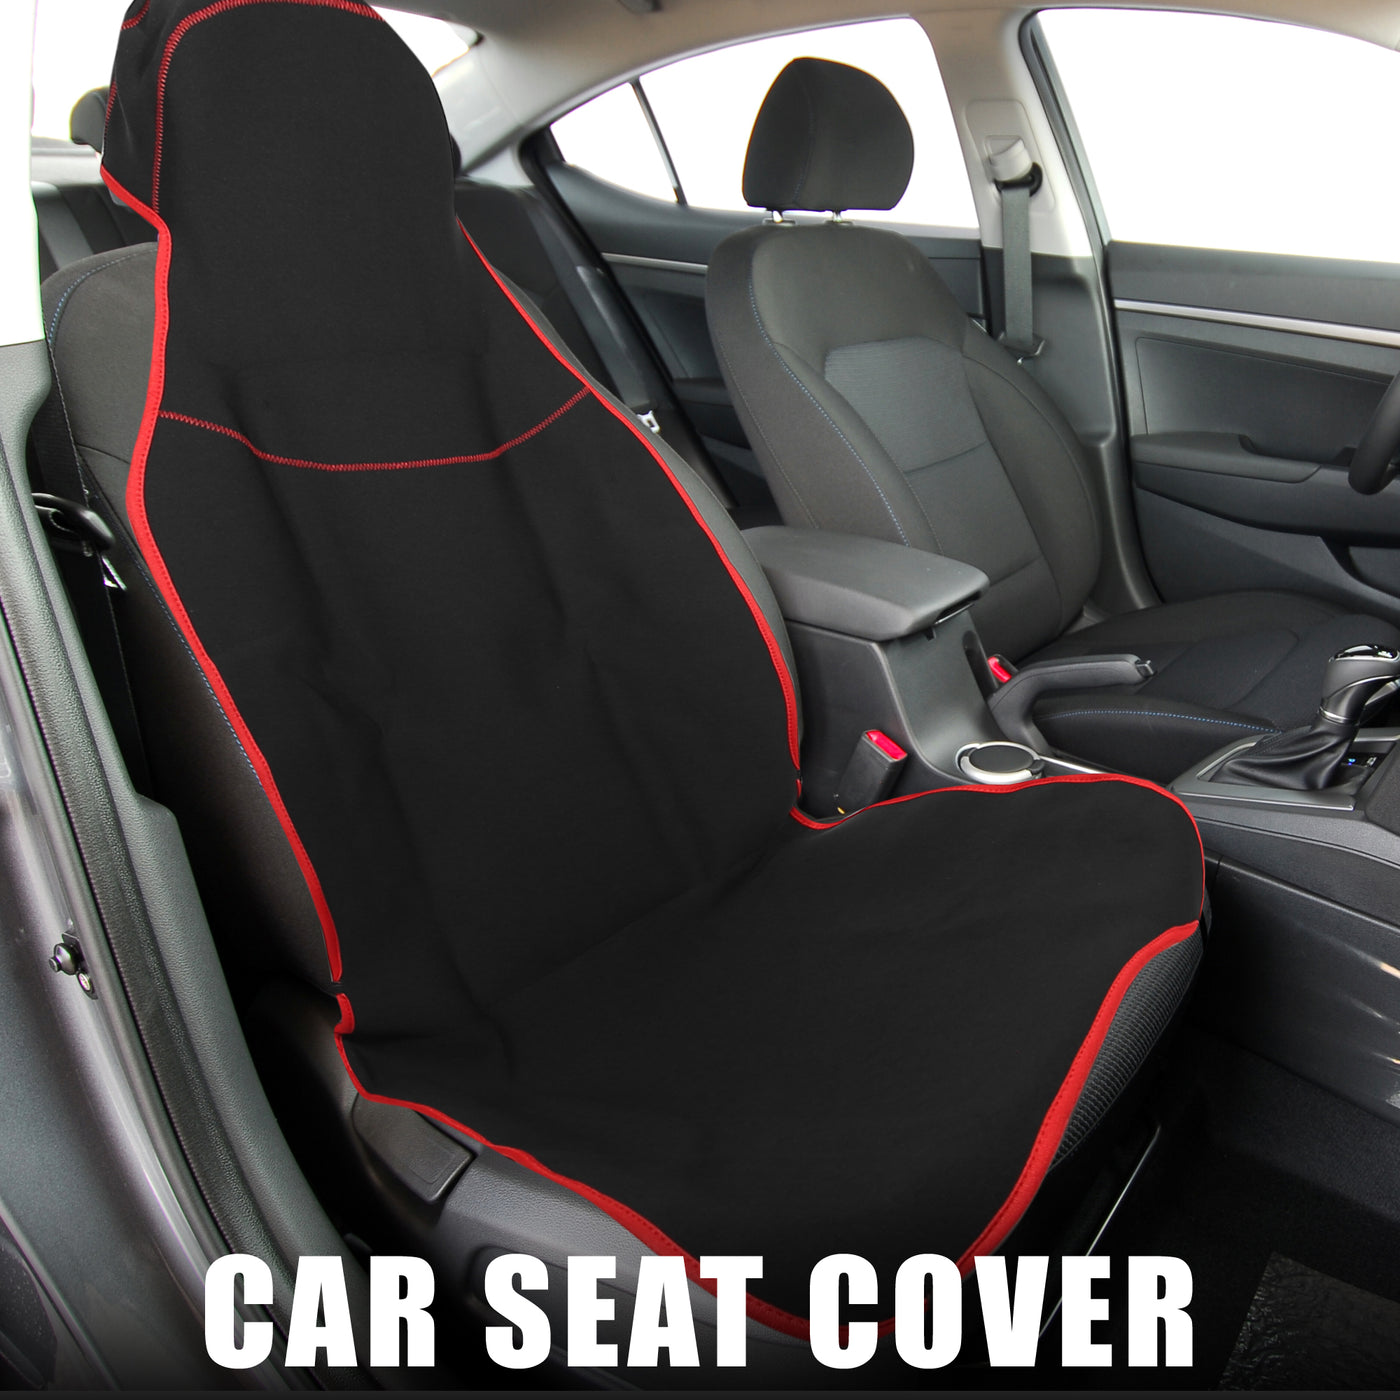 X AUTOHAUX Universal Interior Car Seat Covers Durable Washable Flat Padding Neoprene Car Seat Covers Fit for Cars Trucks and SUVs Red